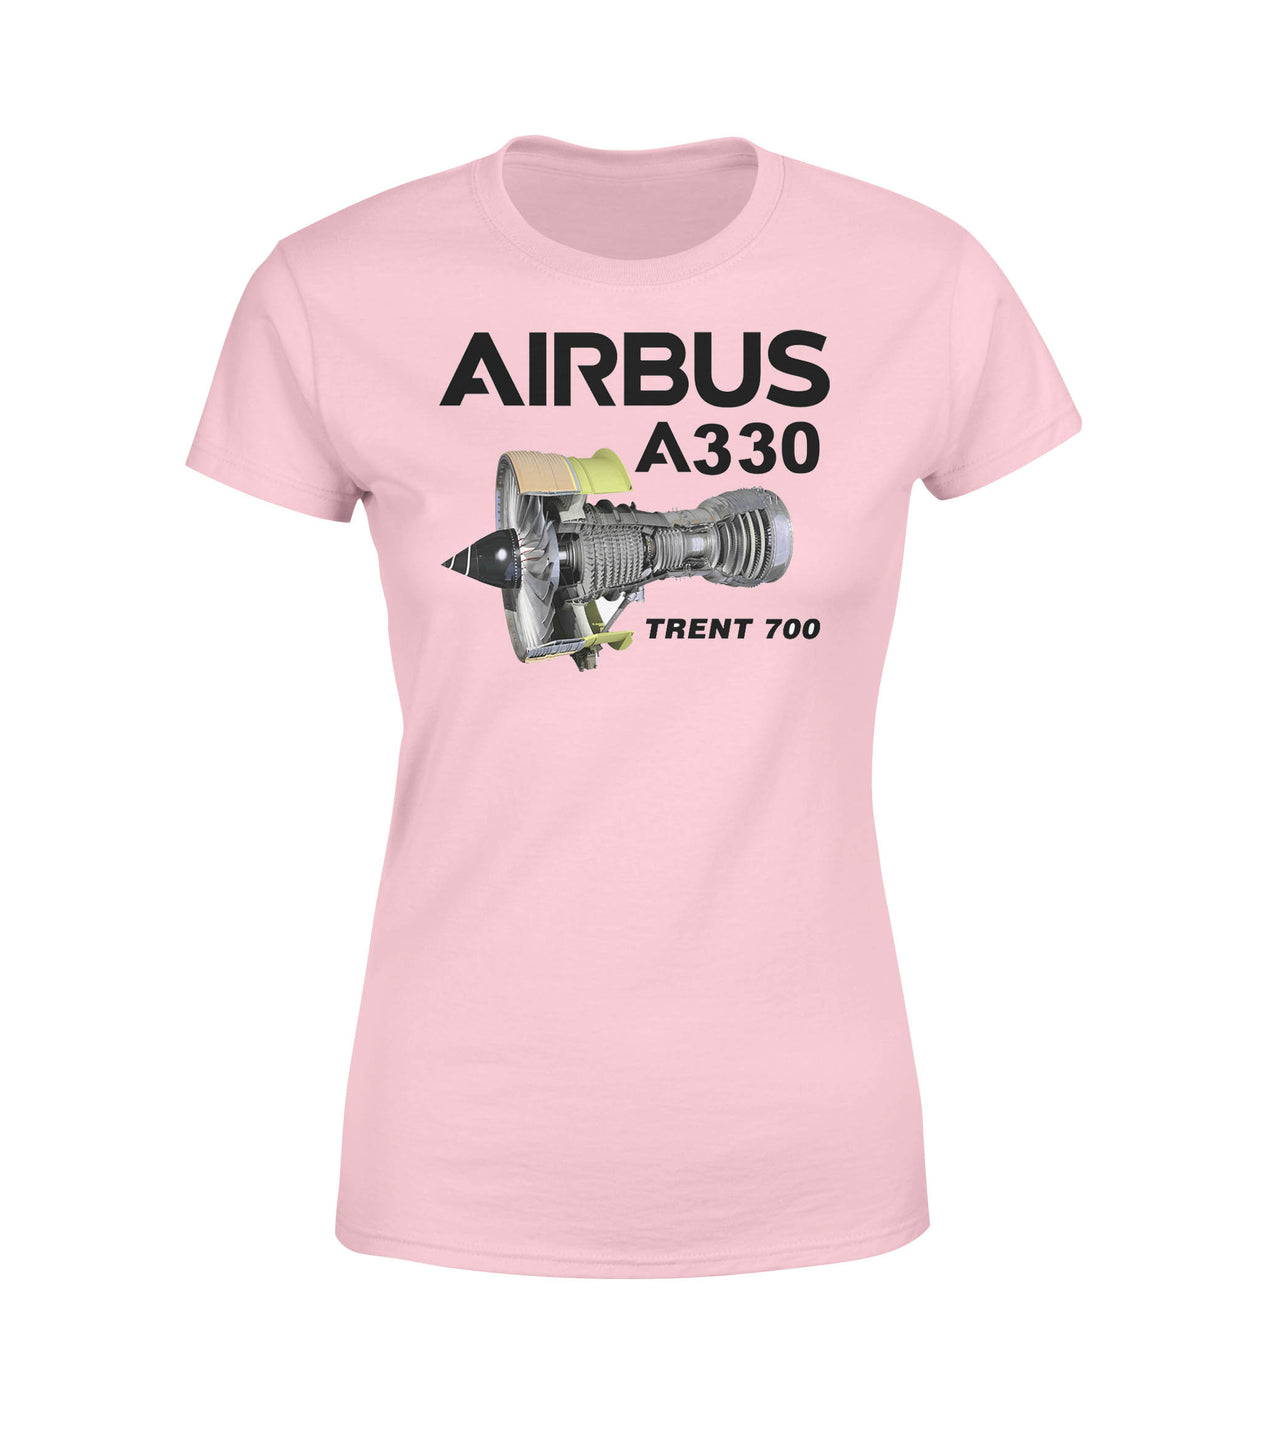 Airbus A330 & Trent 700 Engine Designed Women T-Shirts